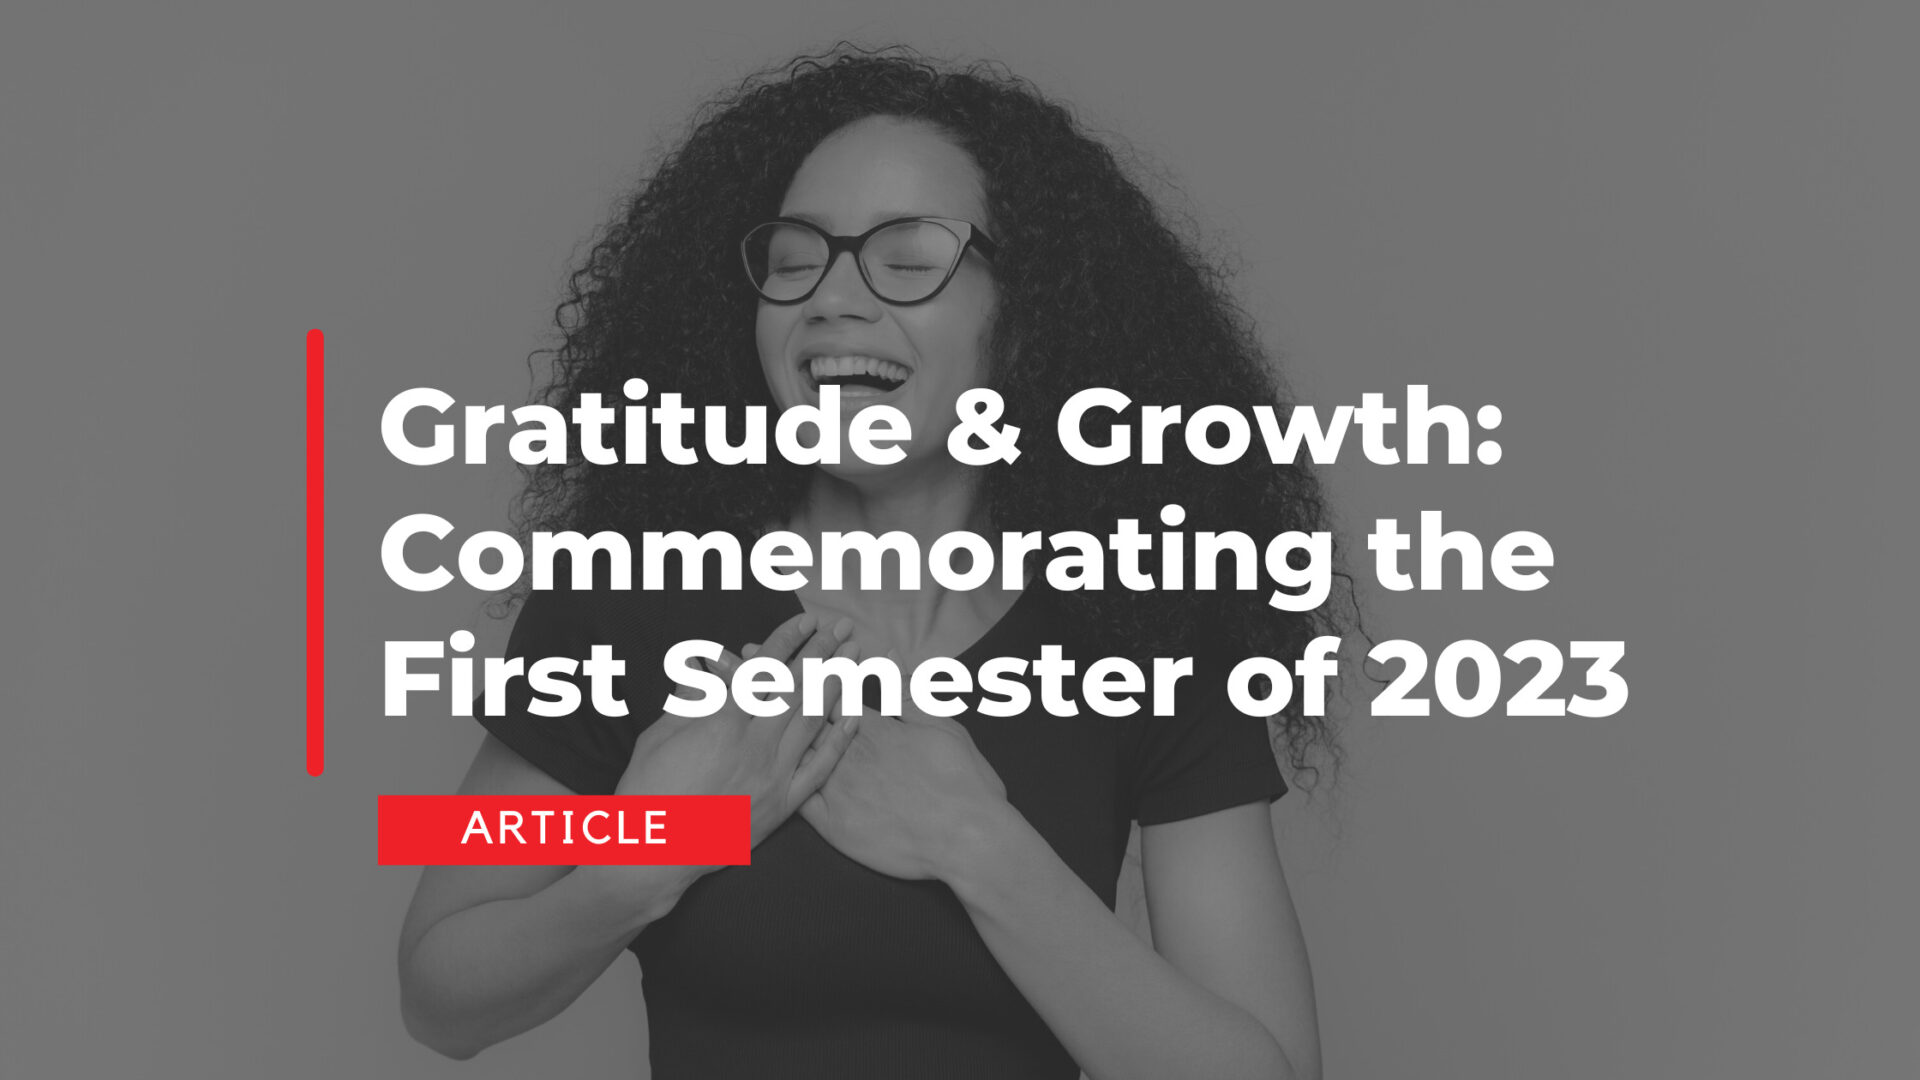 Gratitude & Growth: Commemorating the First Semester of 2023 at Mindroom Innovation